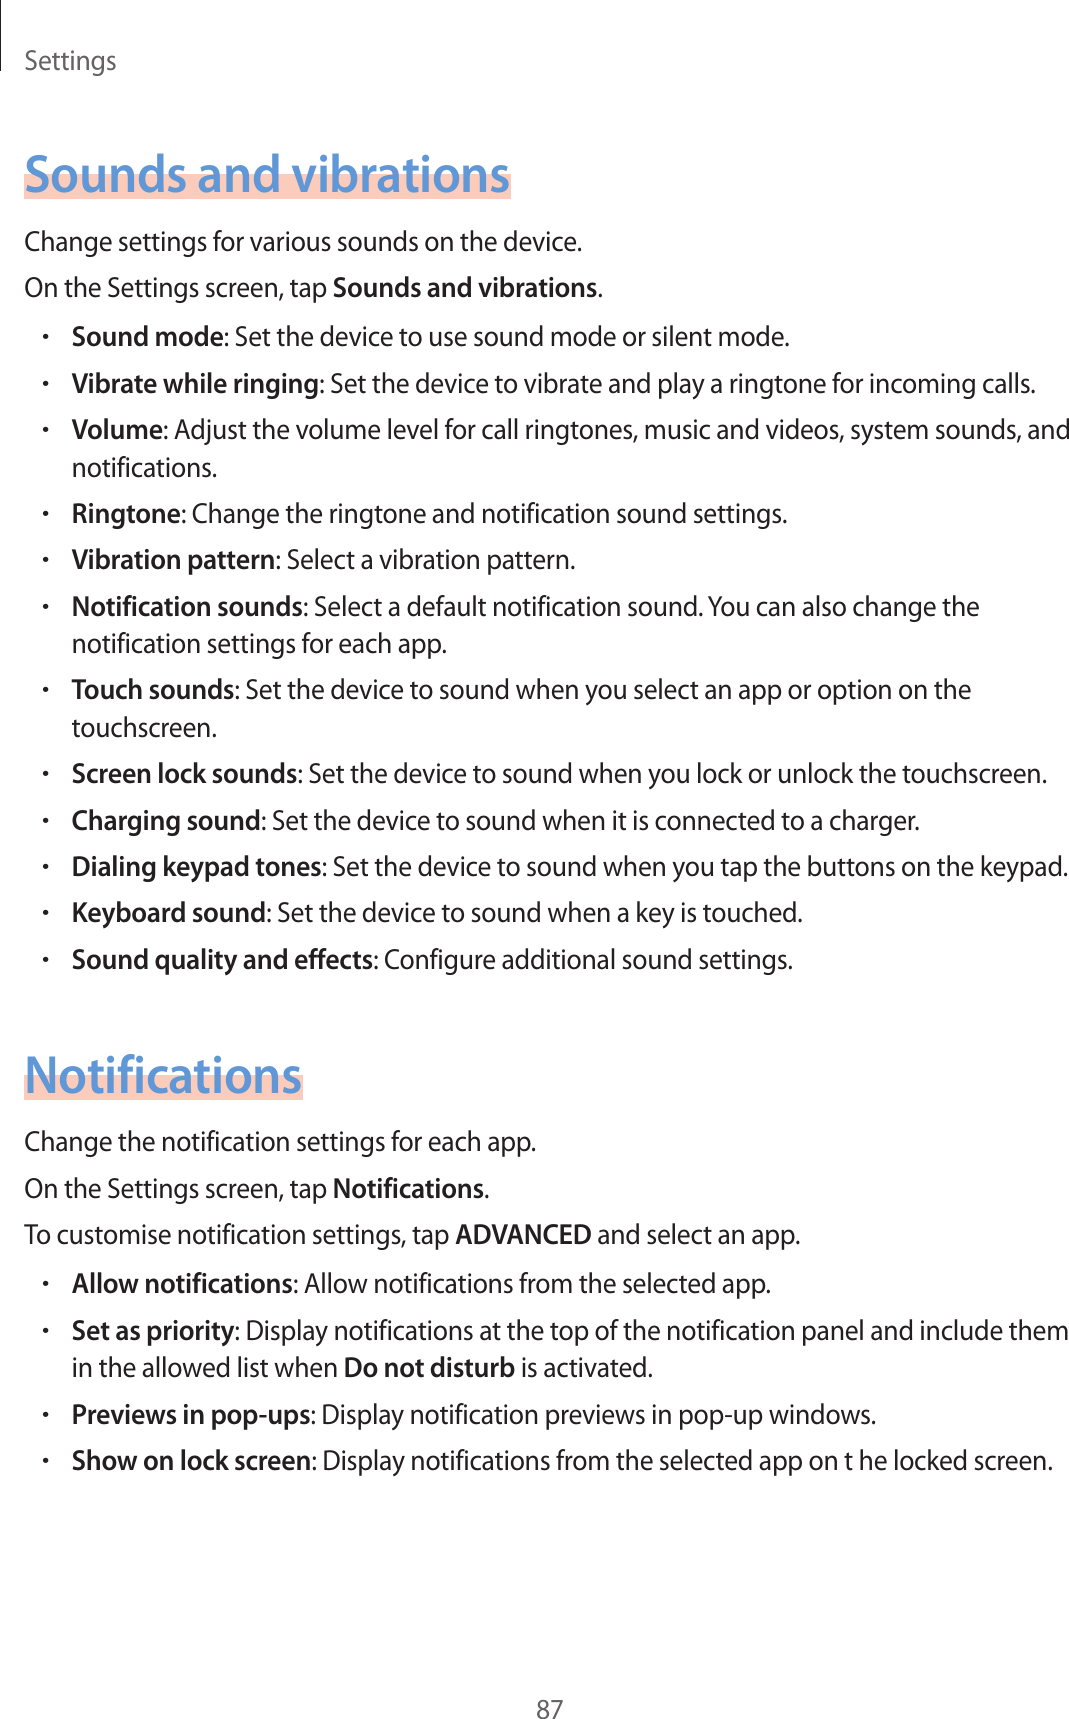 Settings87Sounds and vibrationsChange settings for various sounds on the device.On the Settings screen, tap Sounds and vibrations.•Sound mode: Set the device to use sound mode or silent mode.•Vibrate while ringing: Set the device to vibrate and play a ringtone for incoming calls.•Volume: Adjust the volume level for call ringtones, music and videos, system sounds, and notifications.•Ringtone: Change the ringtone and notification sound settings.•Vibration pattern: Select a vibration pattern.•Notification sounds: Select a default notification sound. You can also change the notification settings for each app.•Touch sounds: Set the device to sound when you select an app or option on the touchscreen.•Screen lock sounds: Set the device to sound when you lock or unlock the touchscreen.•Charging sound: Set the device to sound when it is connected to a charger.•Dialing keypad tones: Set the device to sound when you tap the buttons on the keypad.•Keyboard sound: Set the device to sound when a key is touched.•Sound quality and effects: Configure additional sound settings.NotificationsChange the notification settings for each app.On the Settings screen, tap Notifications.To customise notification settings, tap ADVANCED and select an app.•Allow notifications: Allow notifications from the selected app.•Set as priority: Display notifications at the top of the notification panel and include them in the allowed list when Do not disturb is activated.•Previews in pop-ups: Display notification previews in pop-up windows.•Show on lock screen: Display notifications from the selected app on t he locked screen.